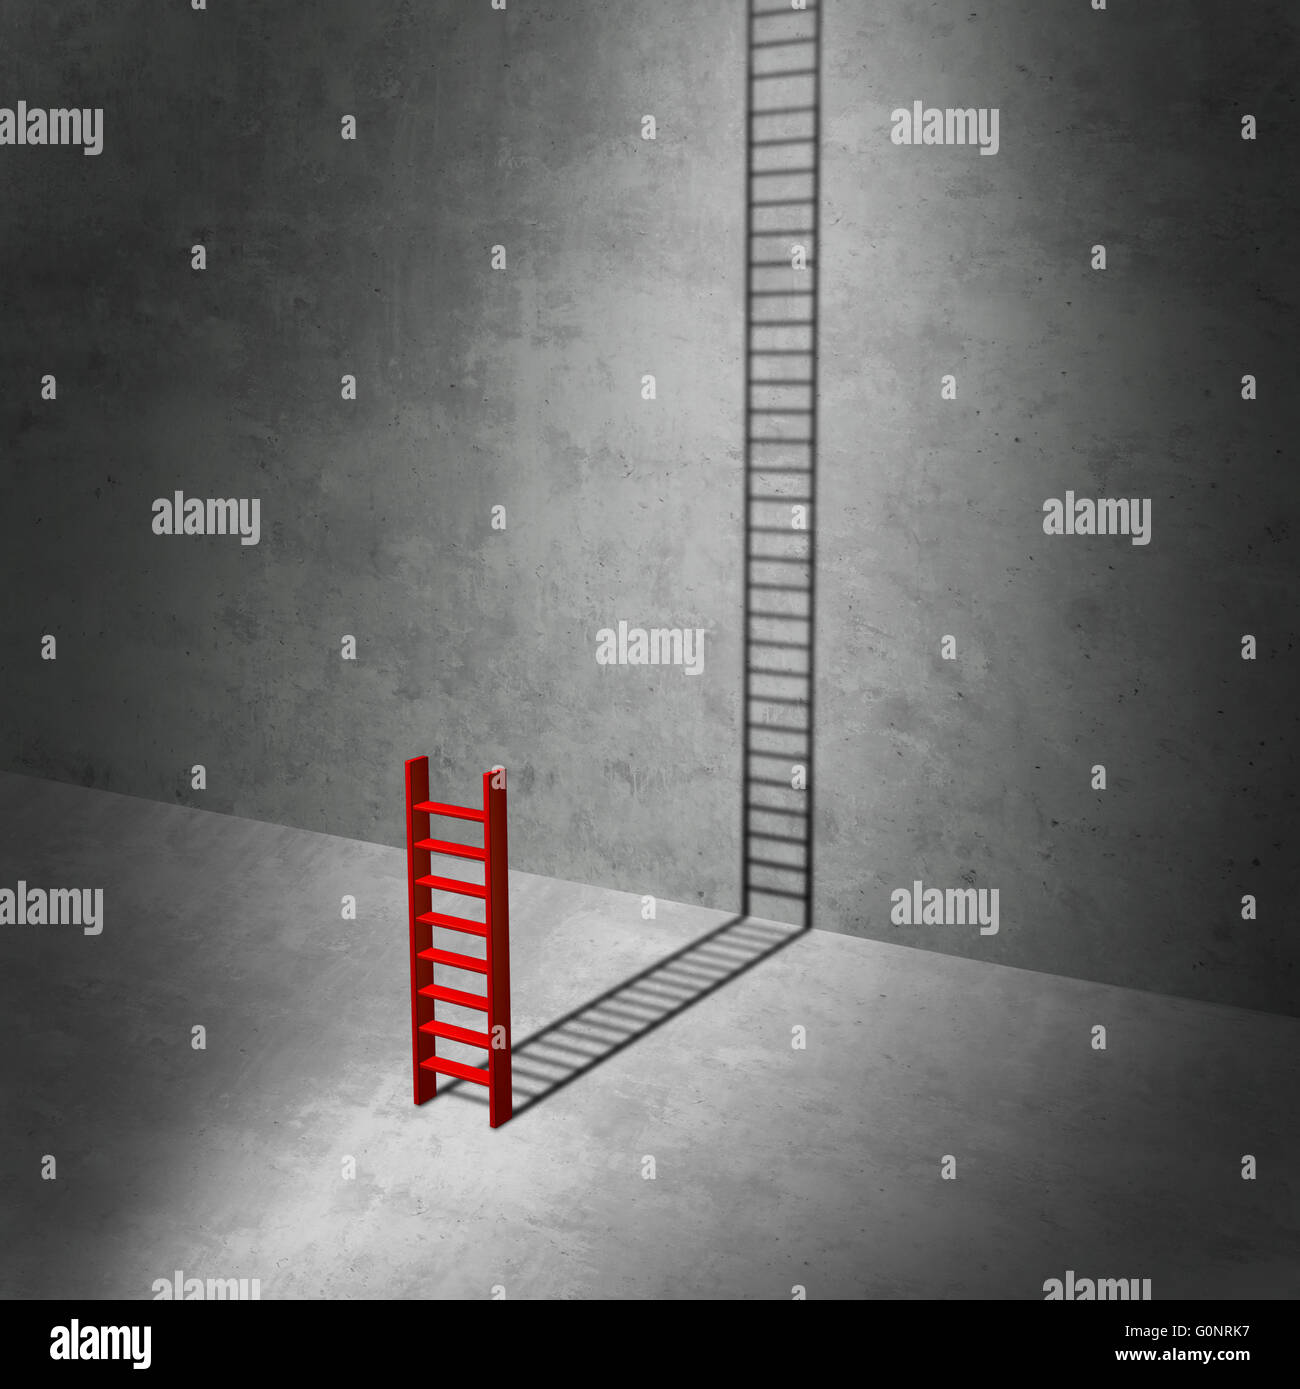 Career potential concept as a business metaphor for imagining success as a symbol for hidden potential as a red ladder casting a long shadow stretching to the top as a 3D illustration. Stock Photo